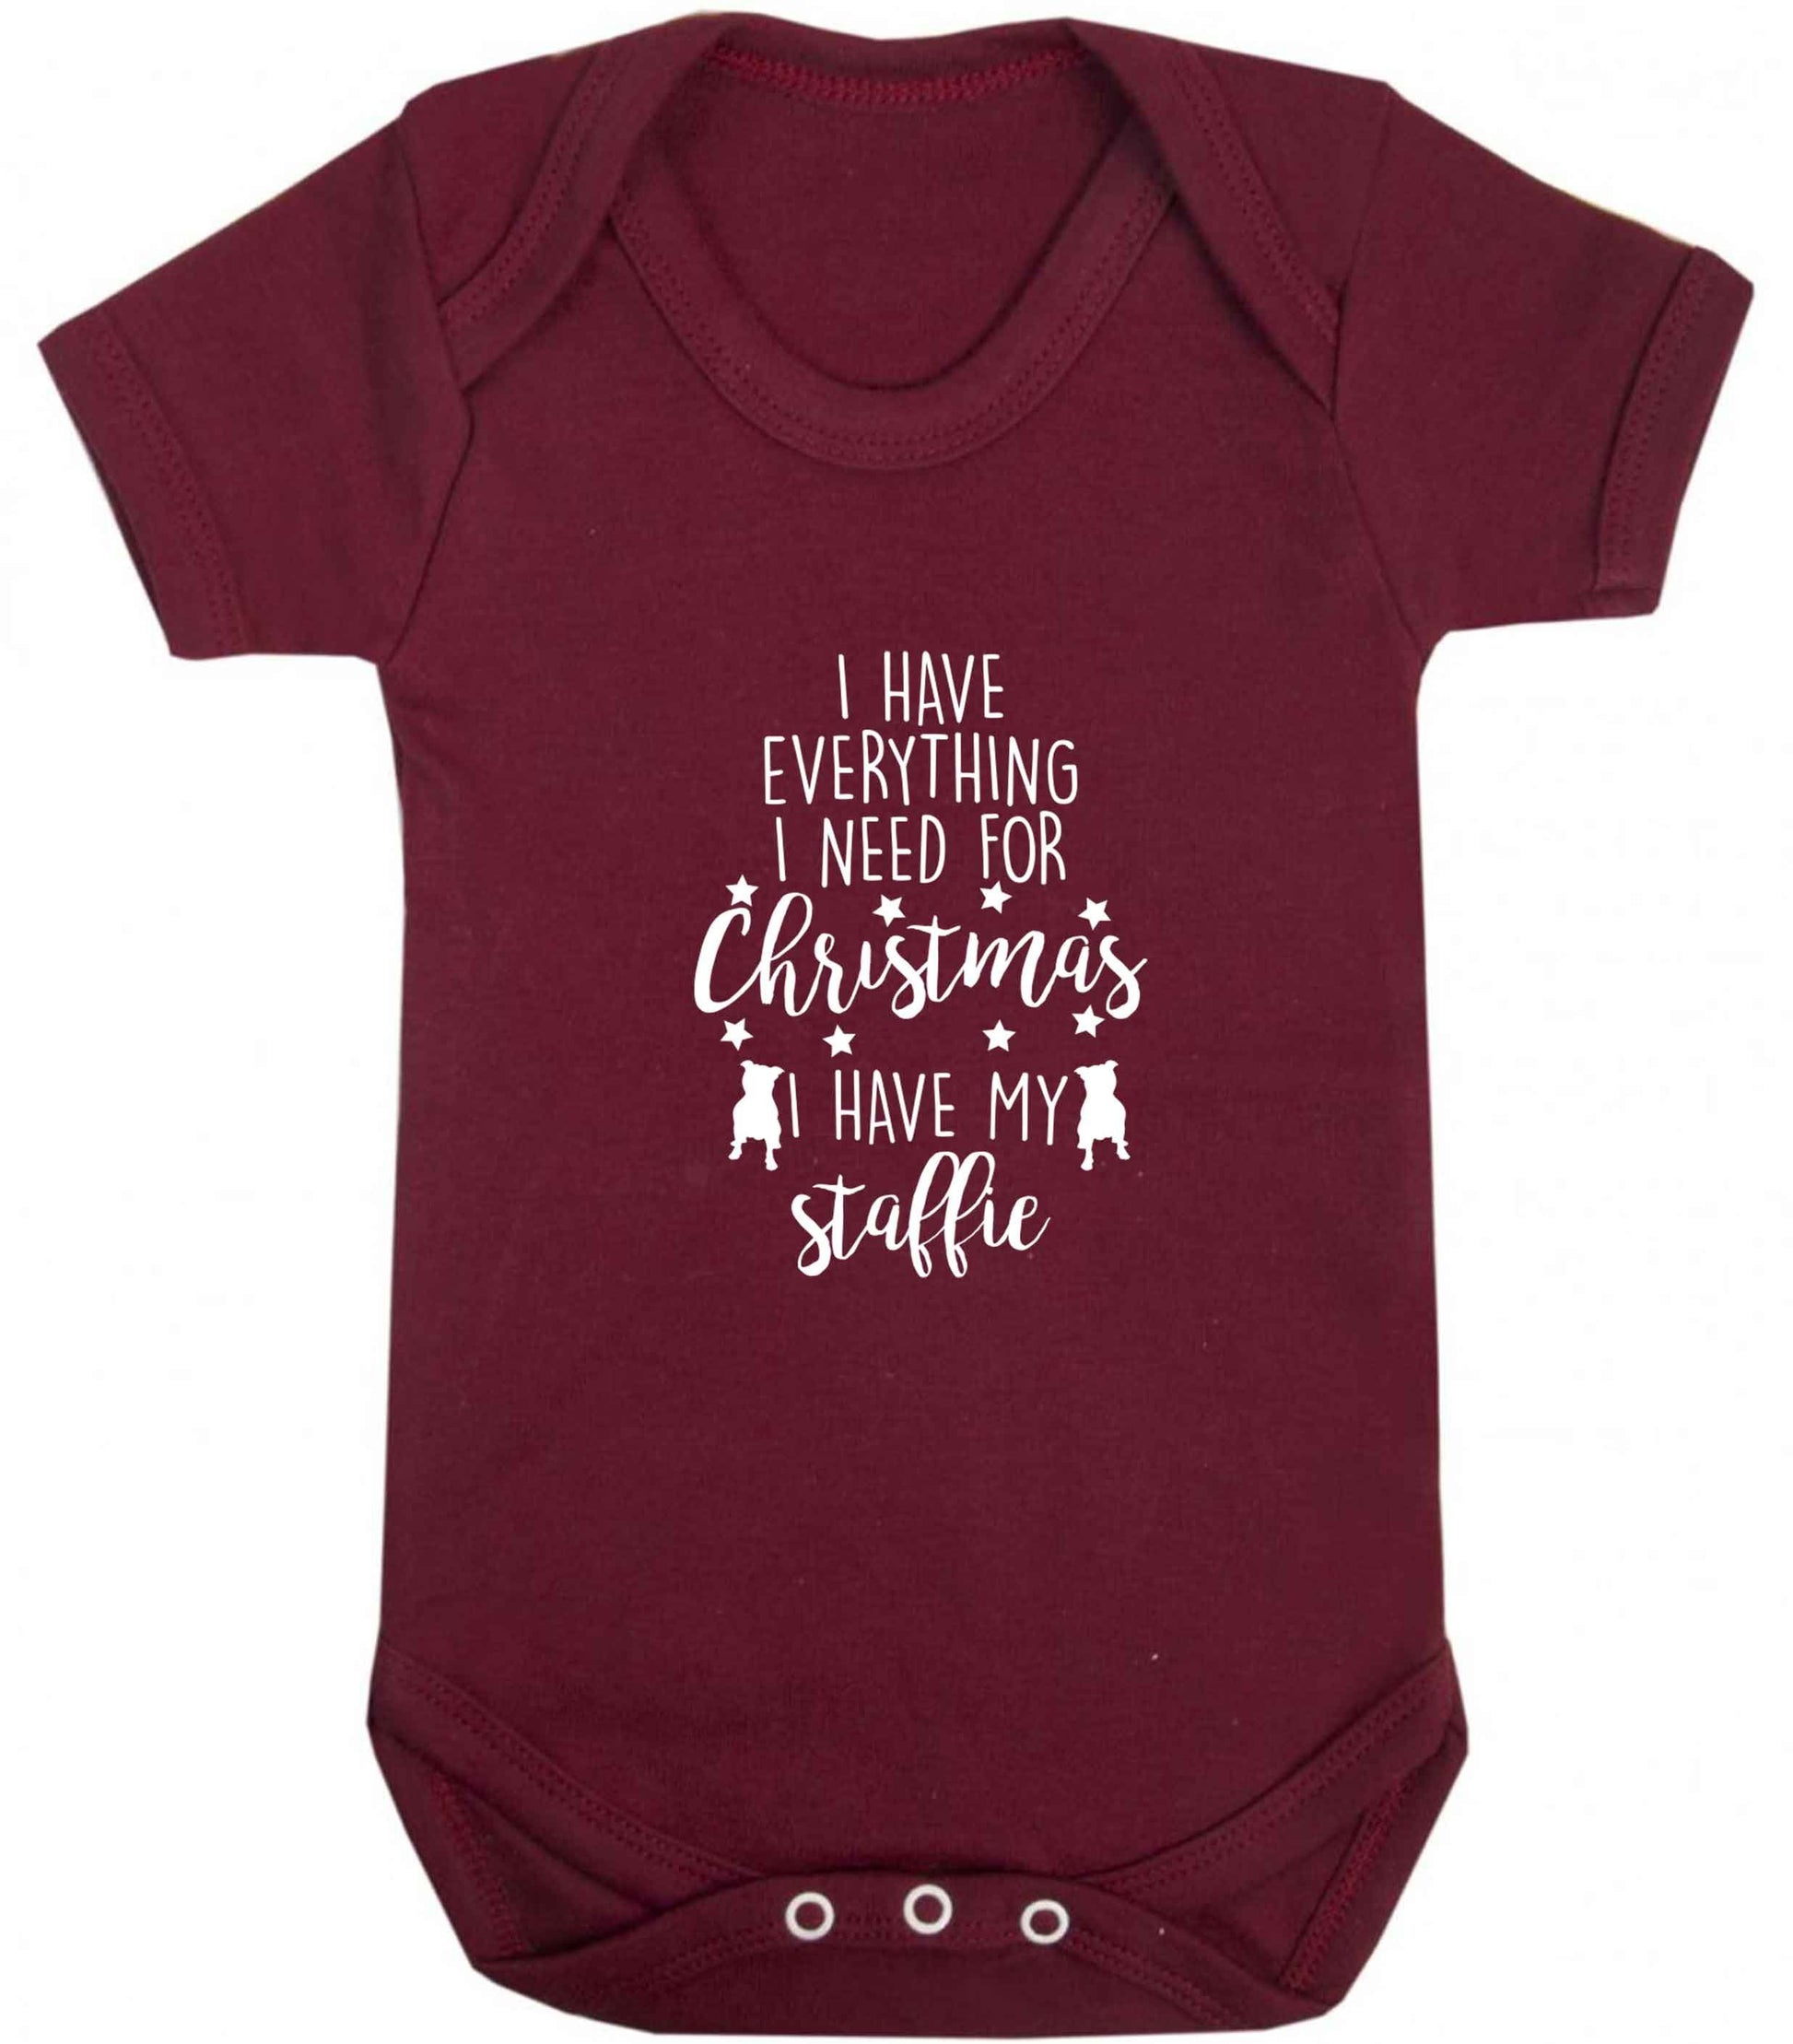 I have everything I need for Christmas I have my staffie baby vest maroon 18-24 months